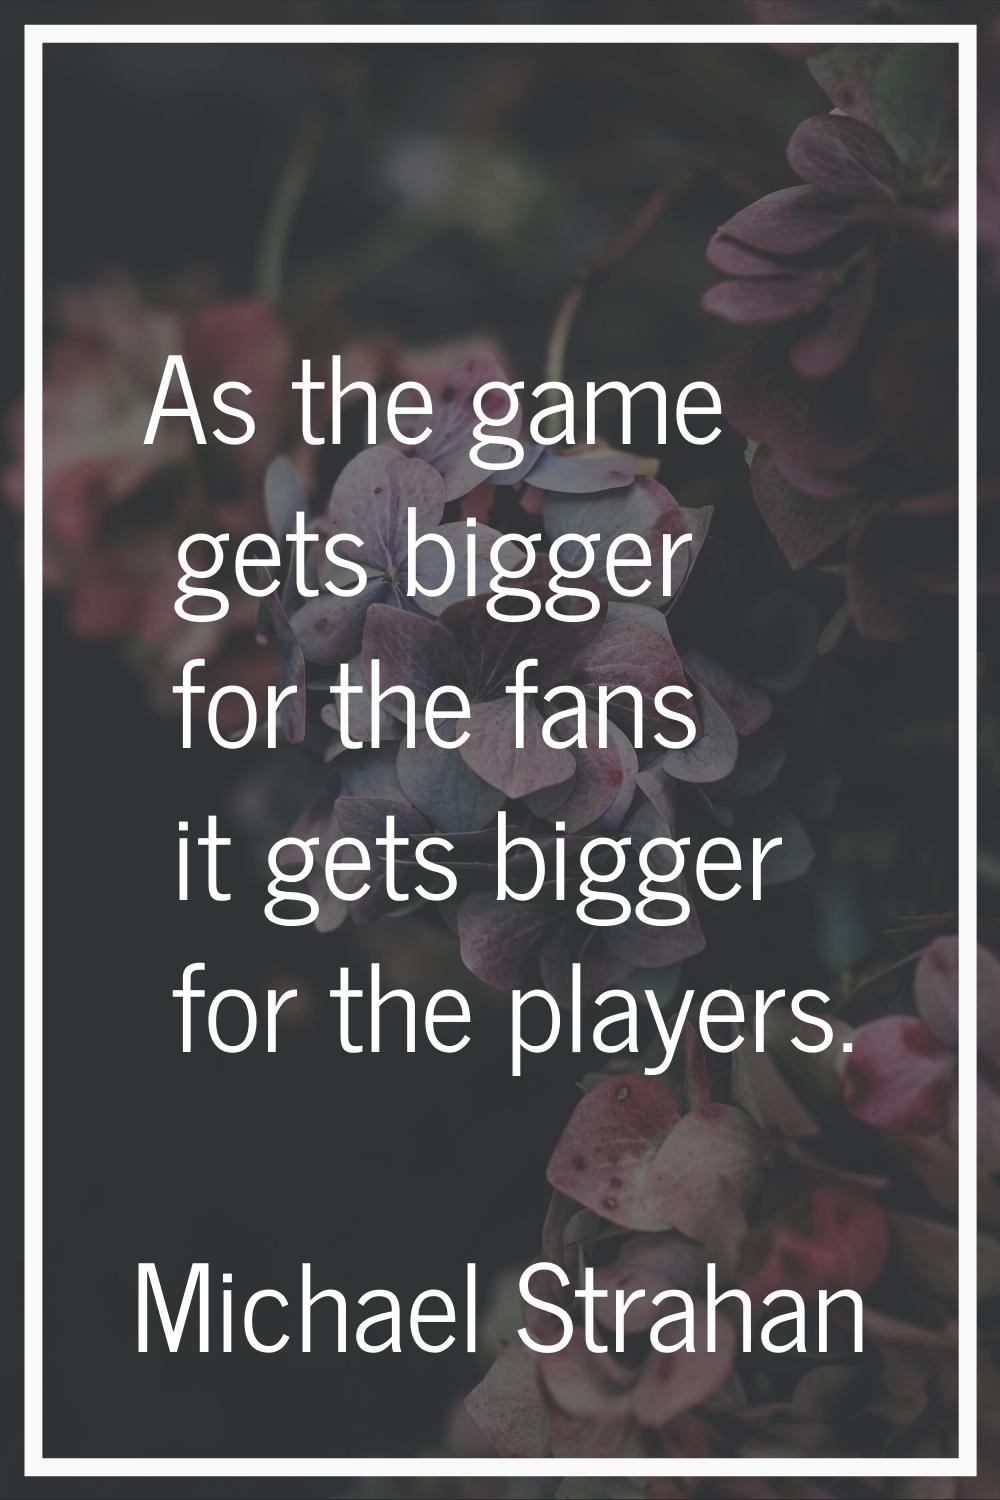 As the game gets bigger for the fans it gets bigger for the players.